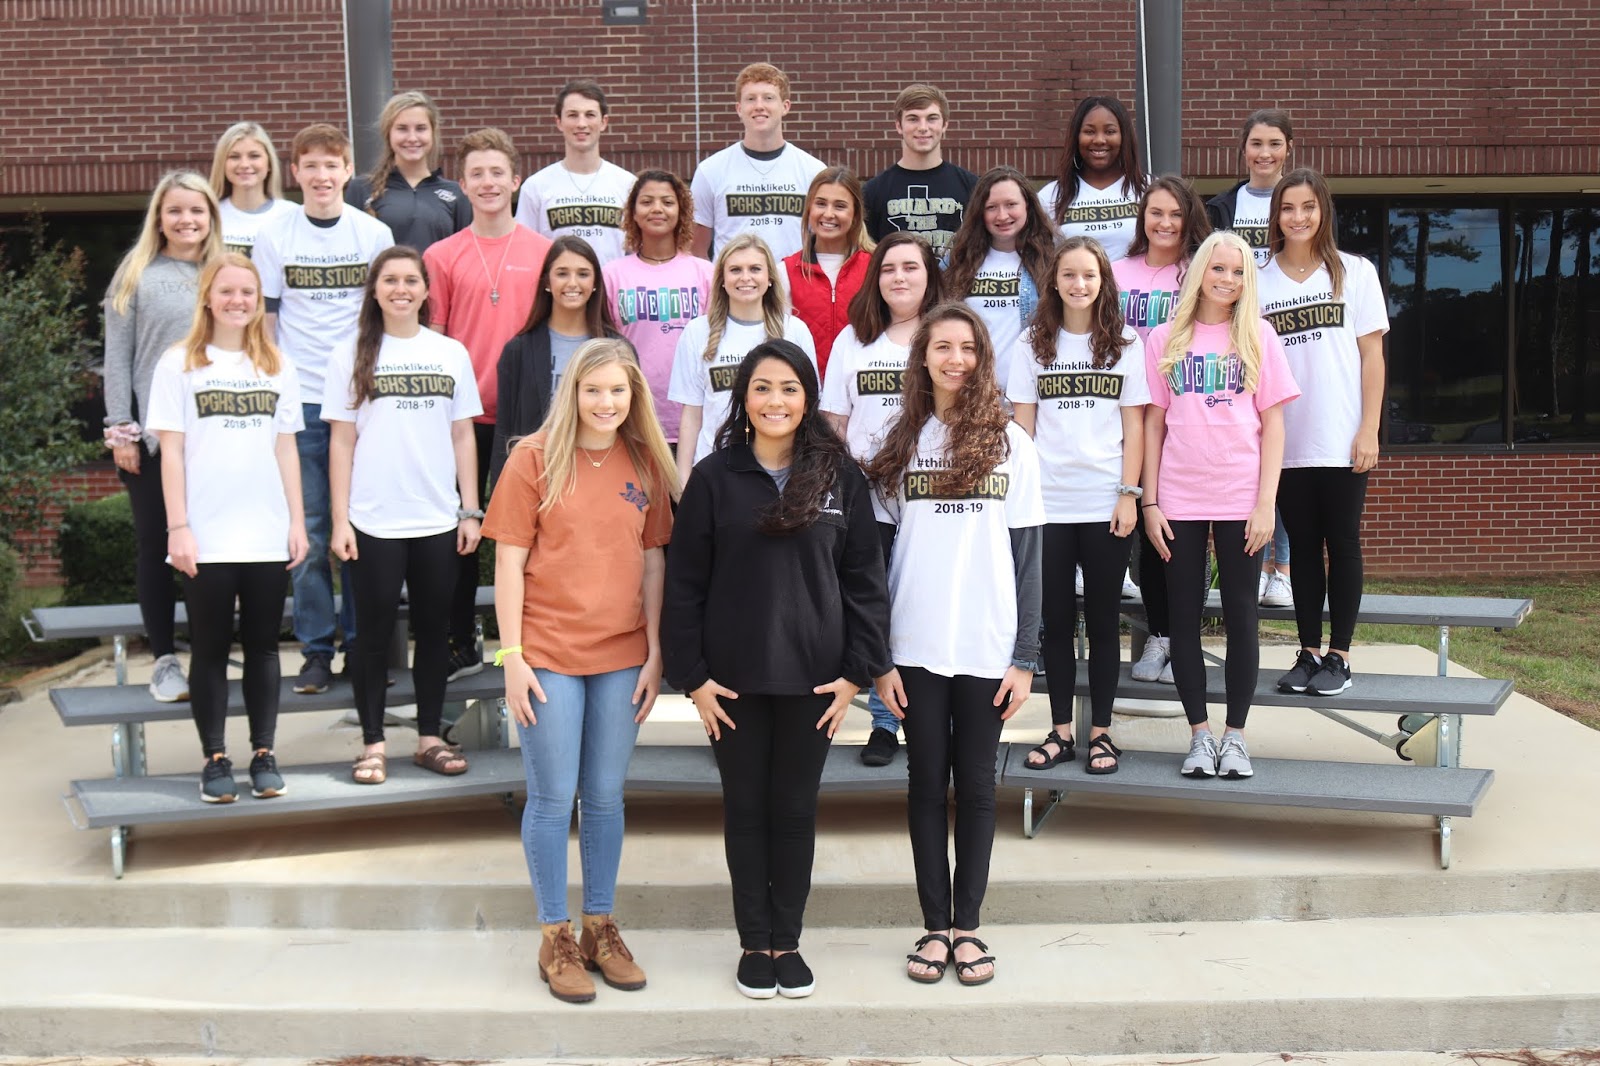 student-council-of-pleasant-grove-high-school-wins-major-state-awards